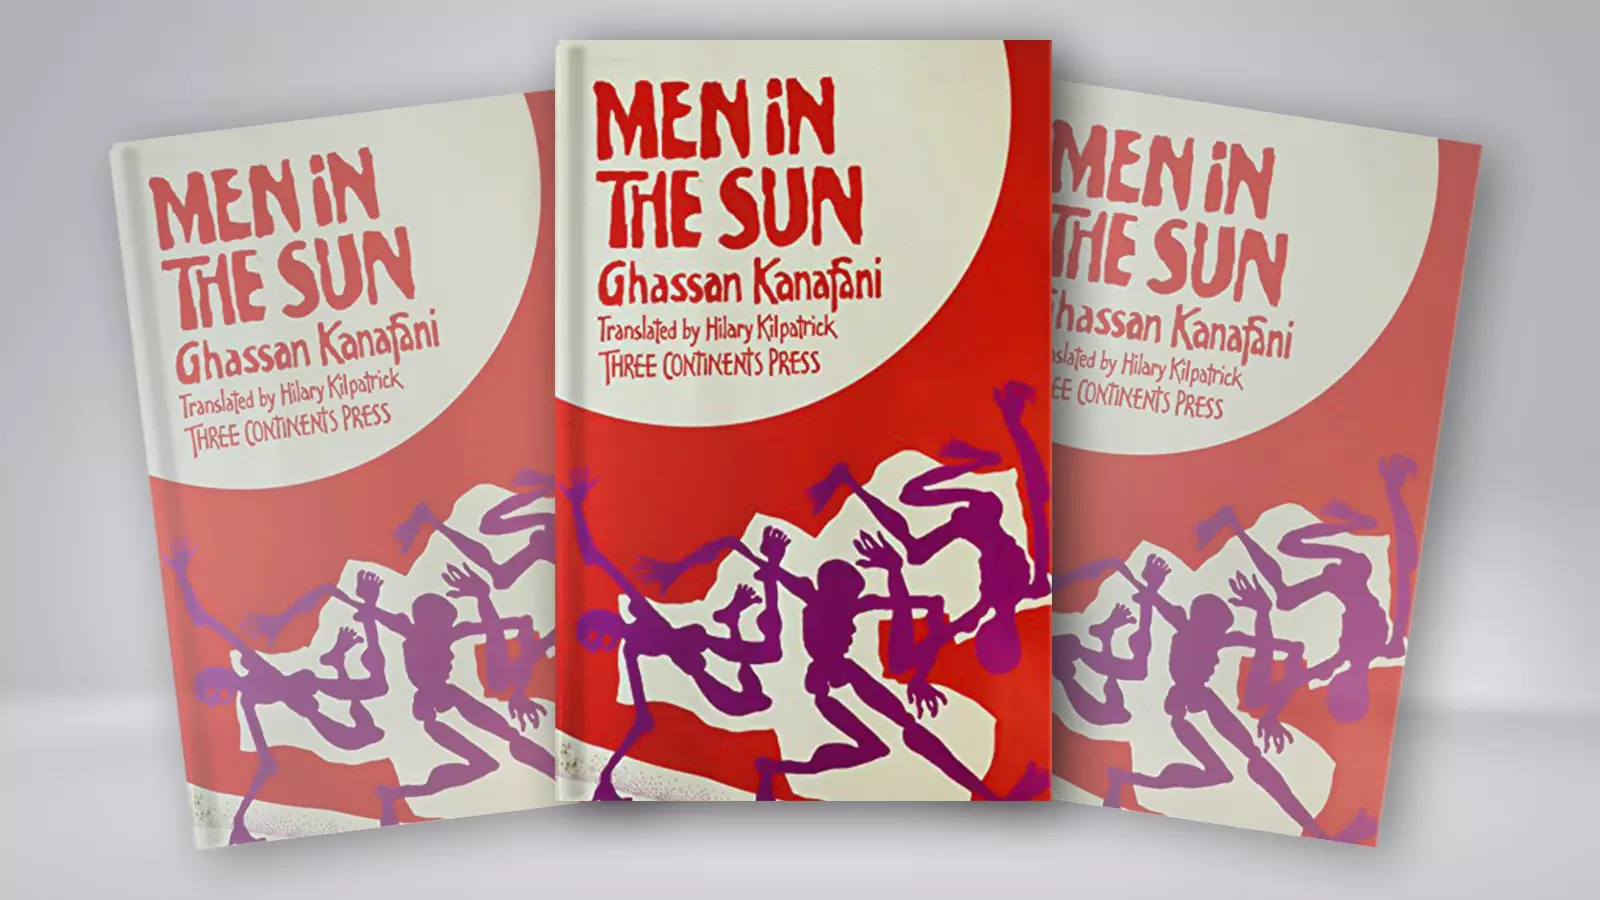 The stories in Men in the Sun explore the plight of Palestinian refugees, and the human cost of the Nakba, the forced expulsion of Palestinians in 1948.